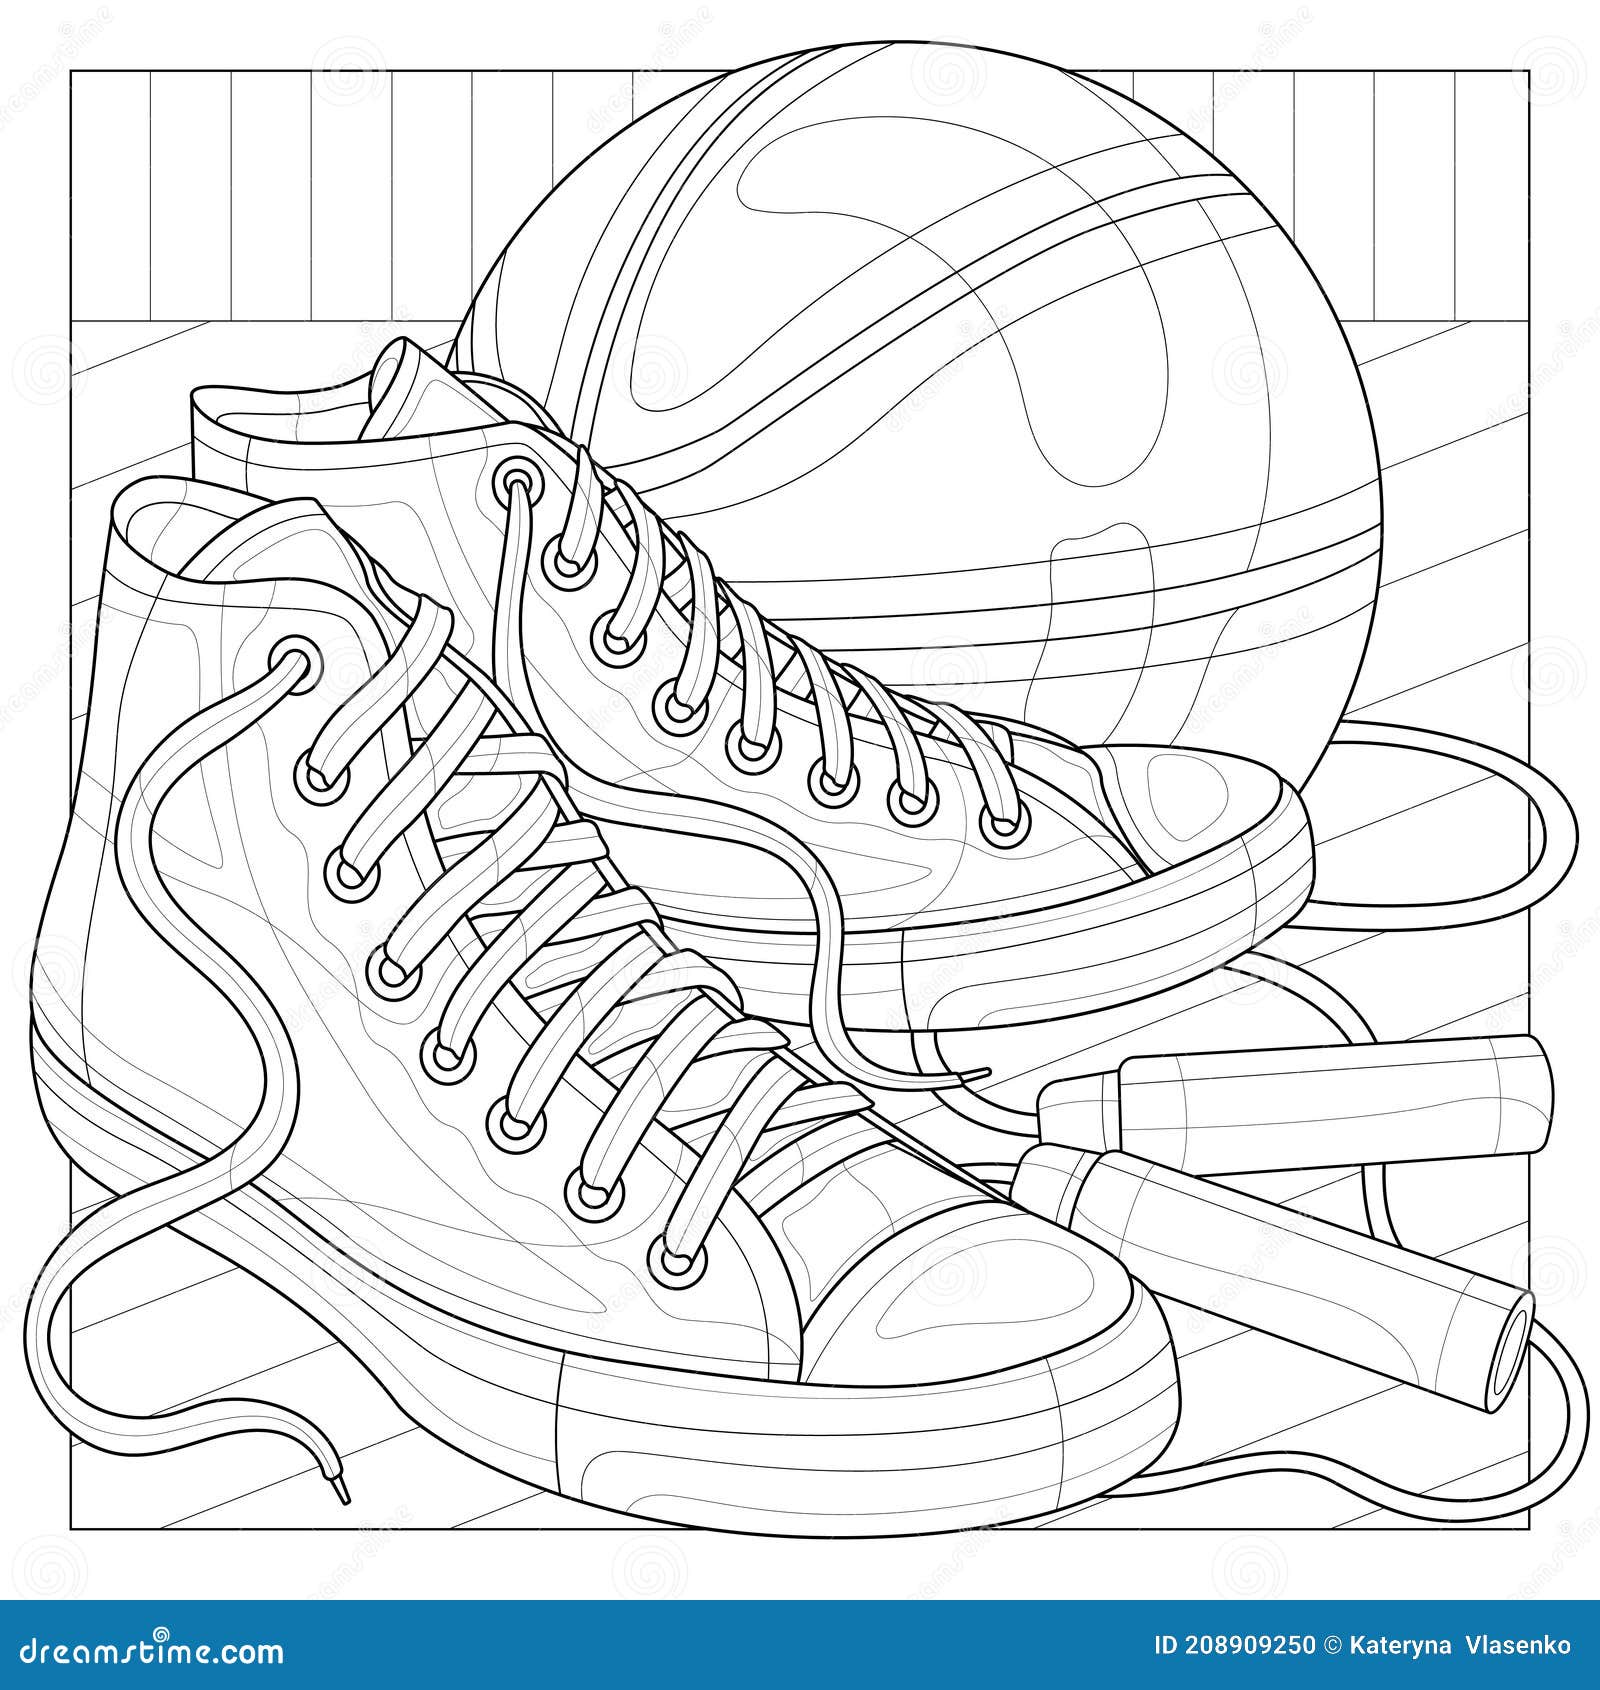 sneakers with a basketball and a jump rope.coloring book antistress for children and adults